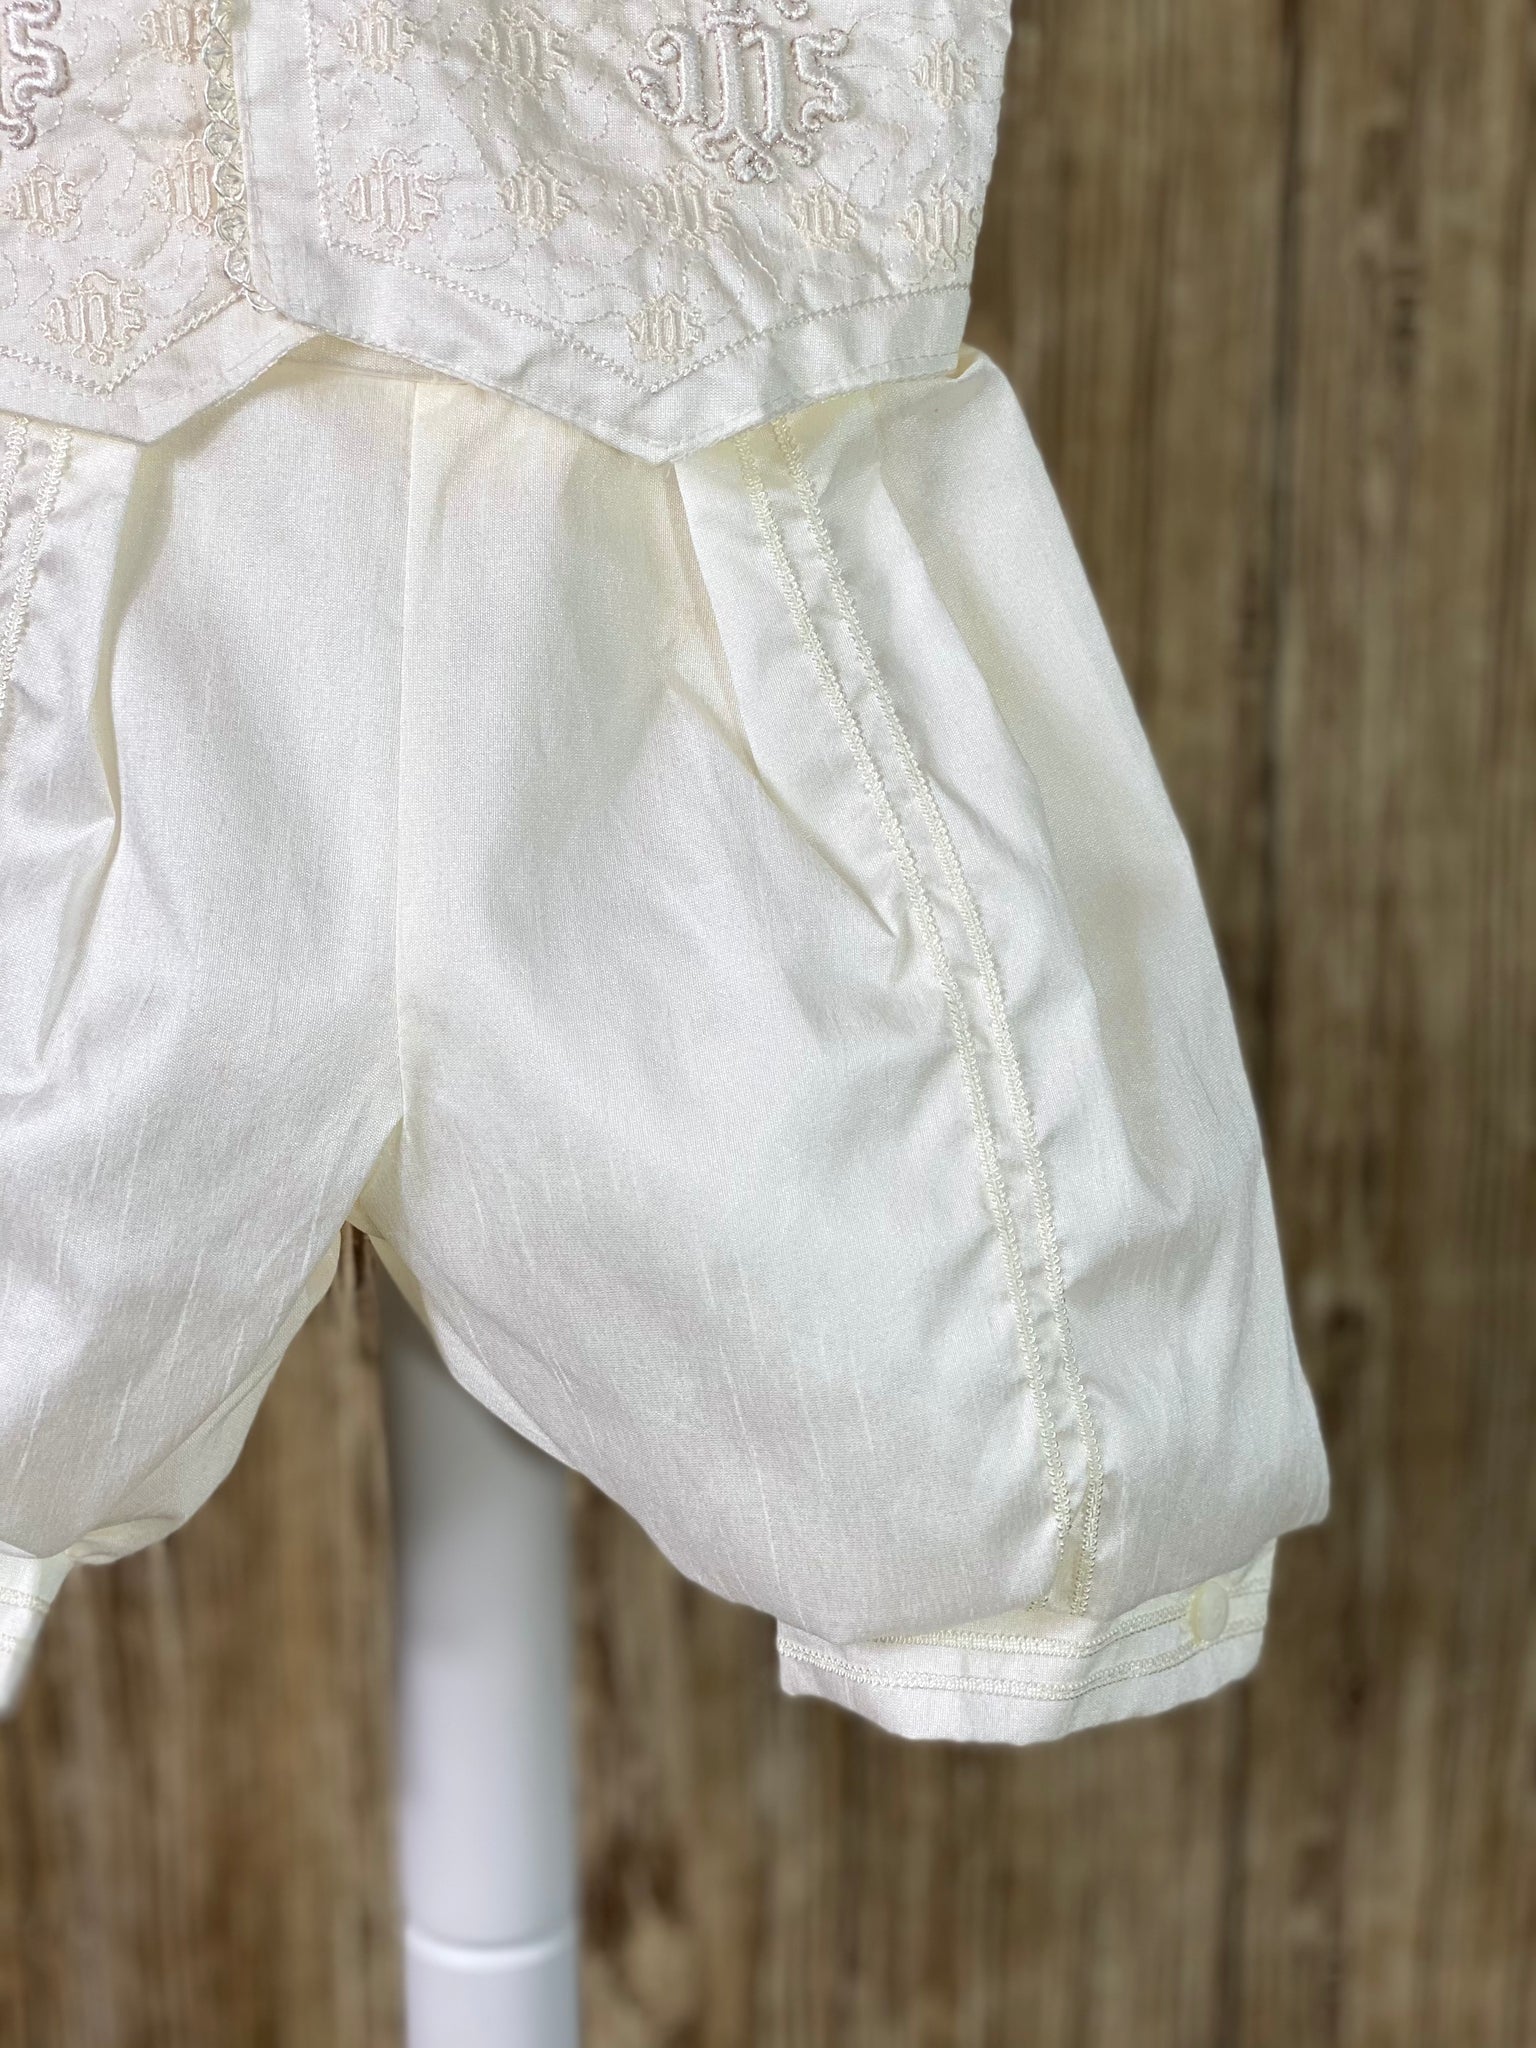 This a beautiful, one-of-a-kind boy’s baptism gown/set.  Lovely clothes for a precious child.   IVORY   4-piece white set including beret, vest, shirt, suspender pants JHS symbol embroidered into vest (JHS stands for Jesus Holmium Salvatore, Latin for Jesus Savior of Mankind) Tassel pin with 3 rhinestone centered circles Thin trim along cuffs, beret, and up pant legs Collared shirt with short sleeves Buttoning on pant cuffs Elastic banding behind pants Button closure on back of shirt